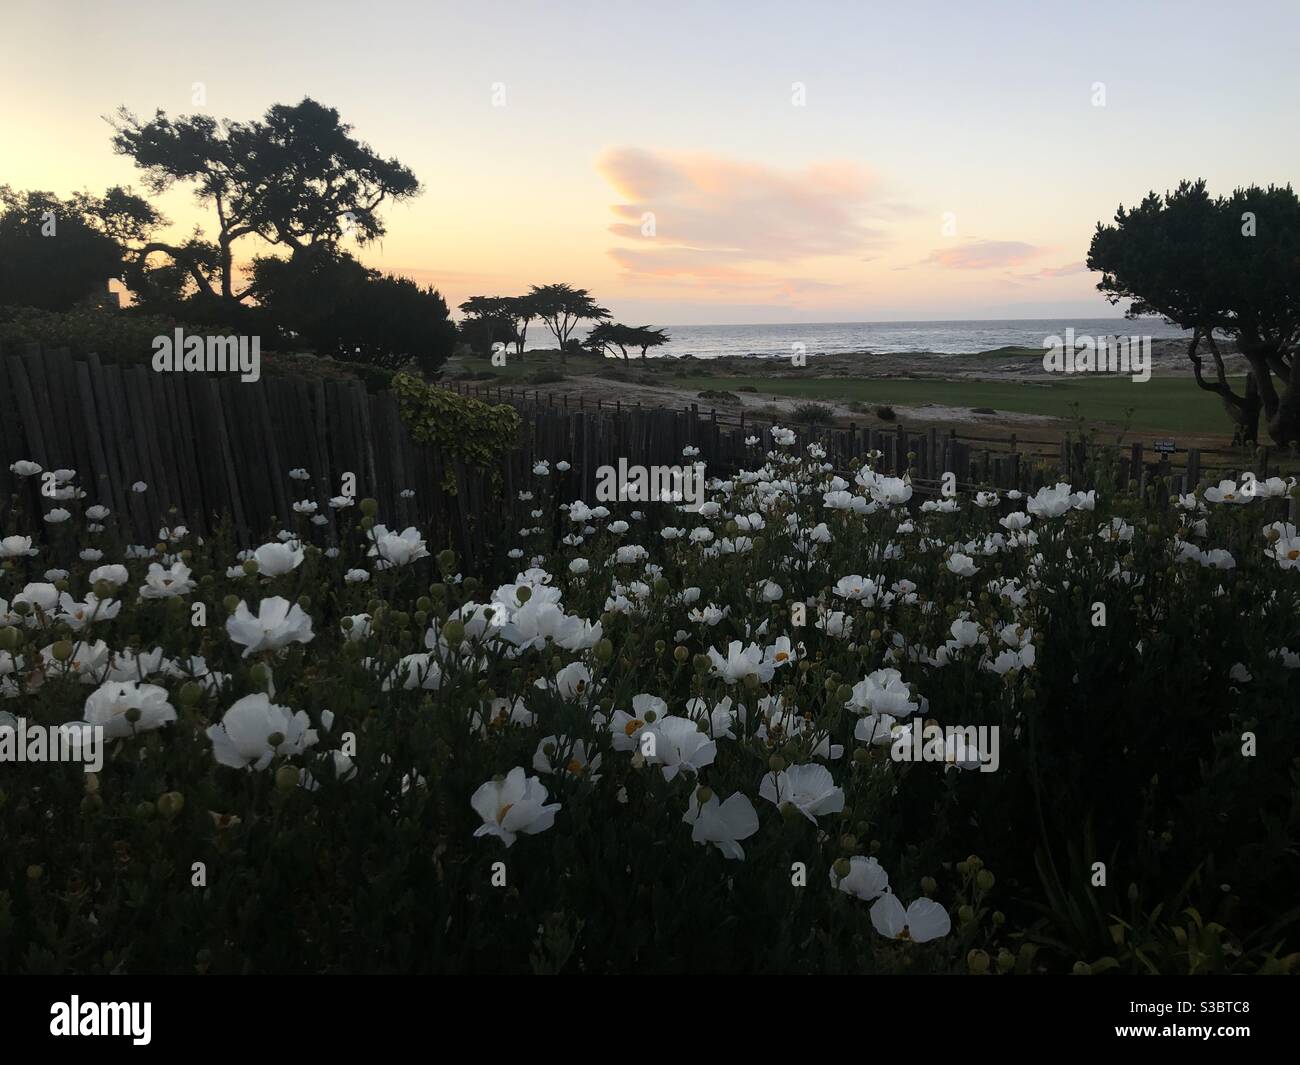 Overgrown yard full of white flowers with california coast and golf course in the background Stock Photo